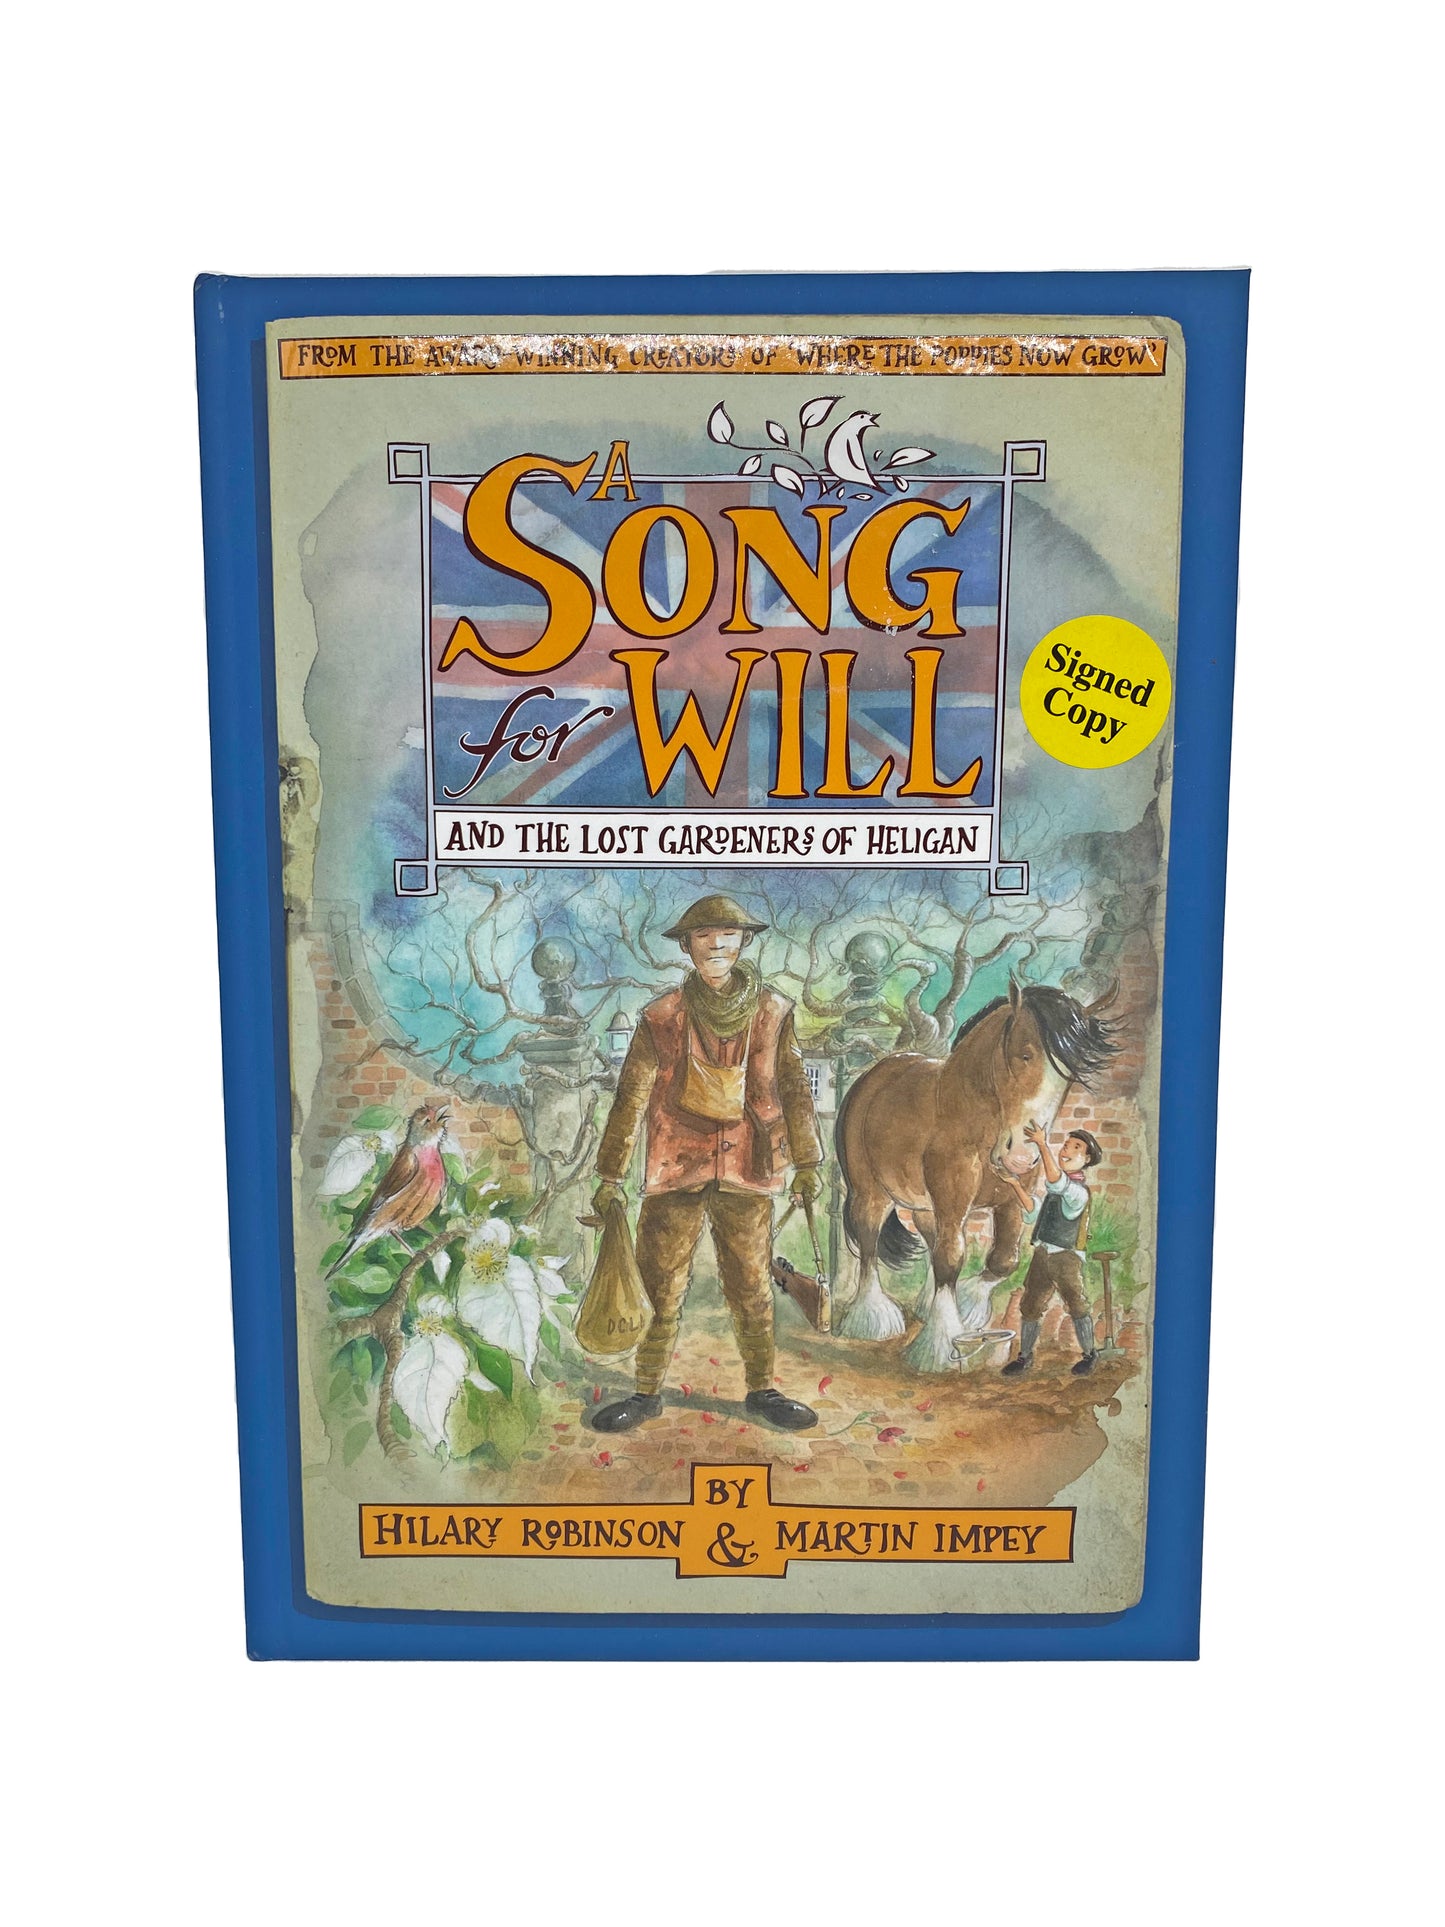 A Song for Will and The Lost Gardens of Heligan